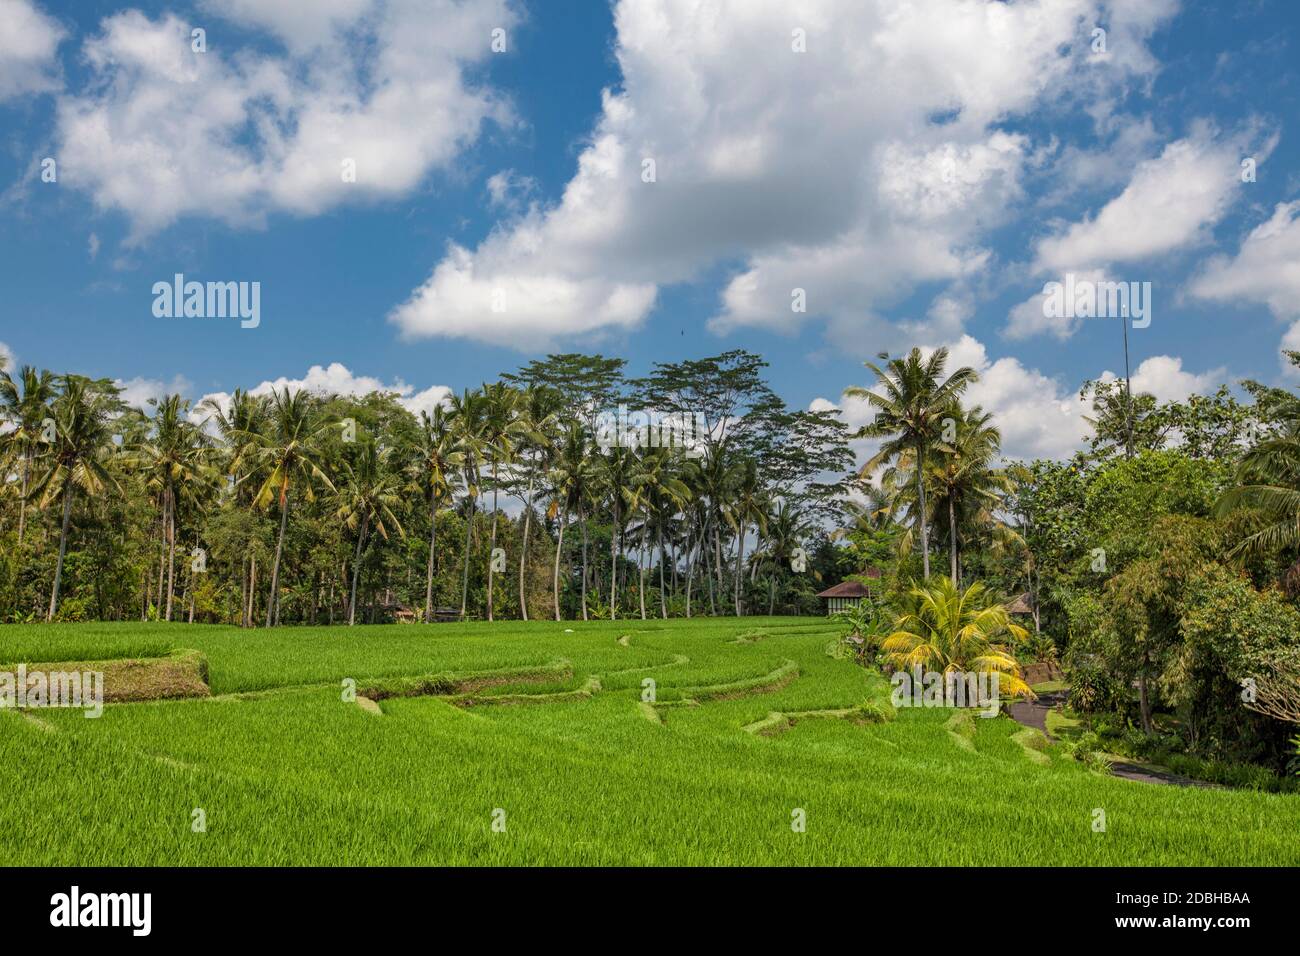 Best scenic Asian backgrounds and landscapes, people culture and nature of  Bali and Java islands, travel places in Indonesia Stock Photo - Alamy